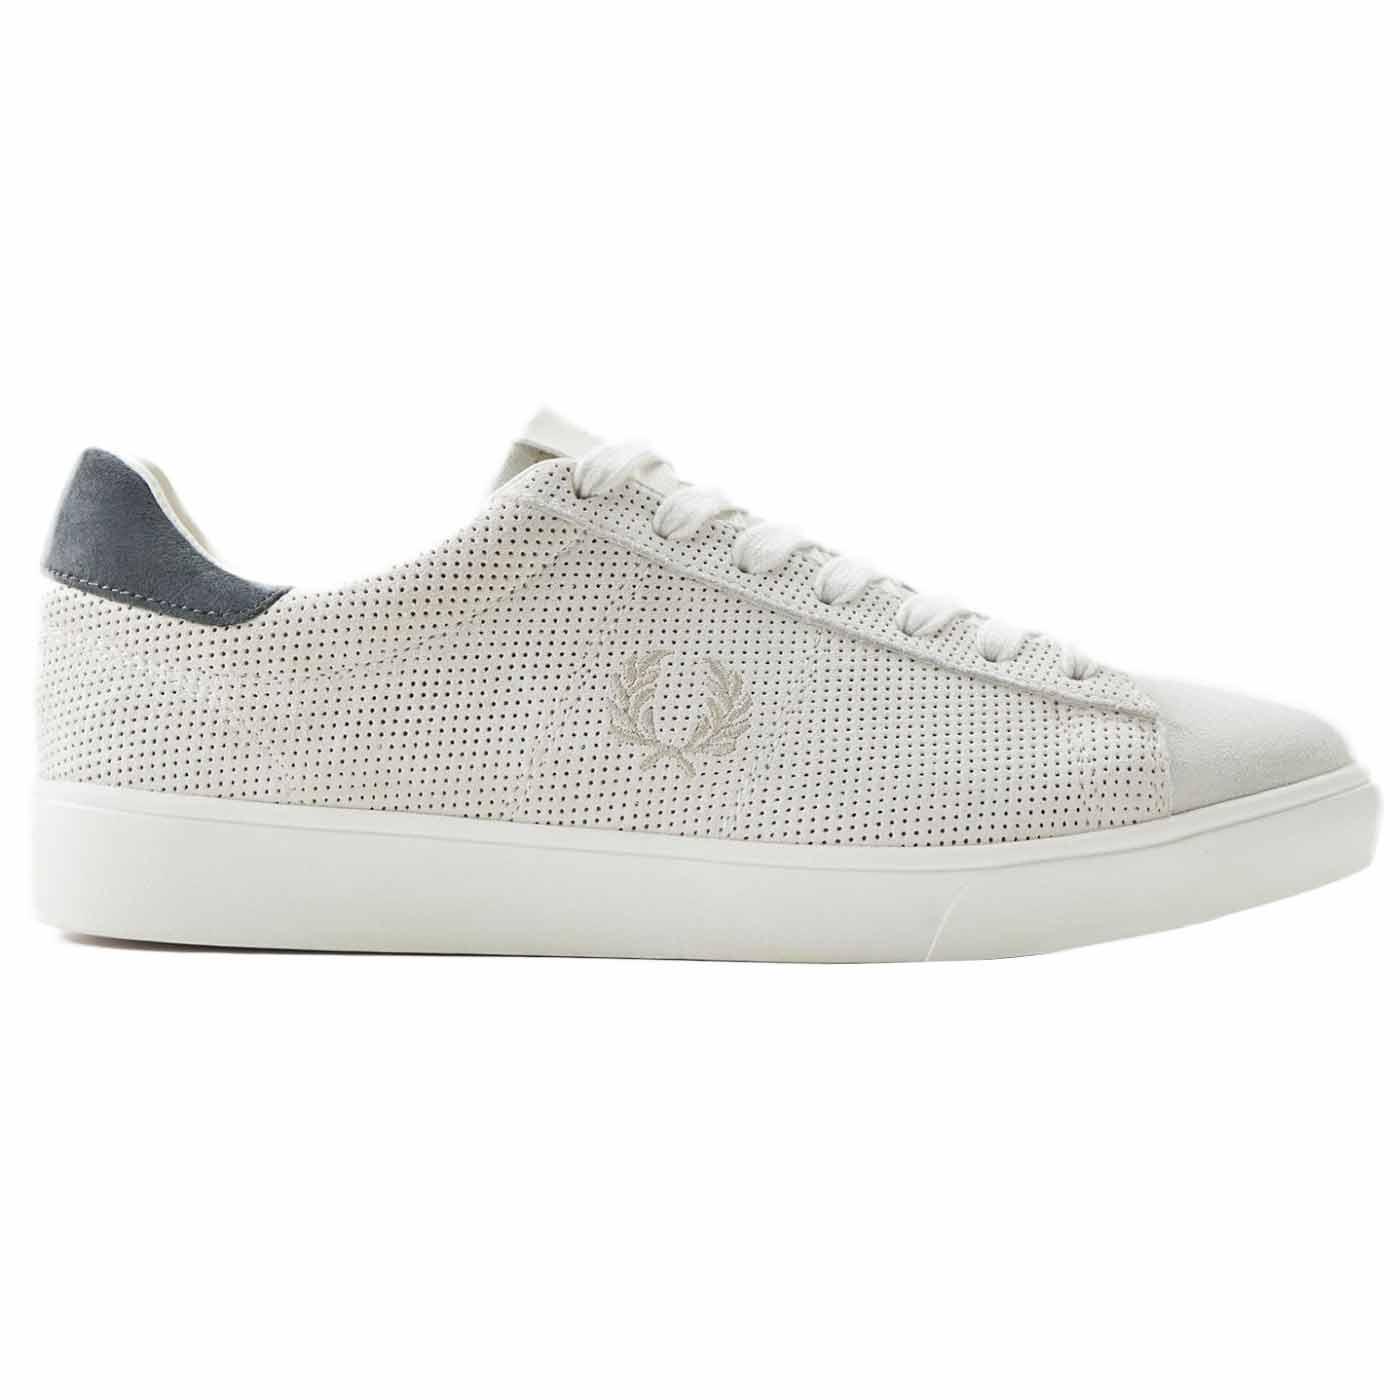 Spencer Fred Perry Retro Suede Tennis Shoes SW